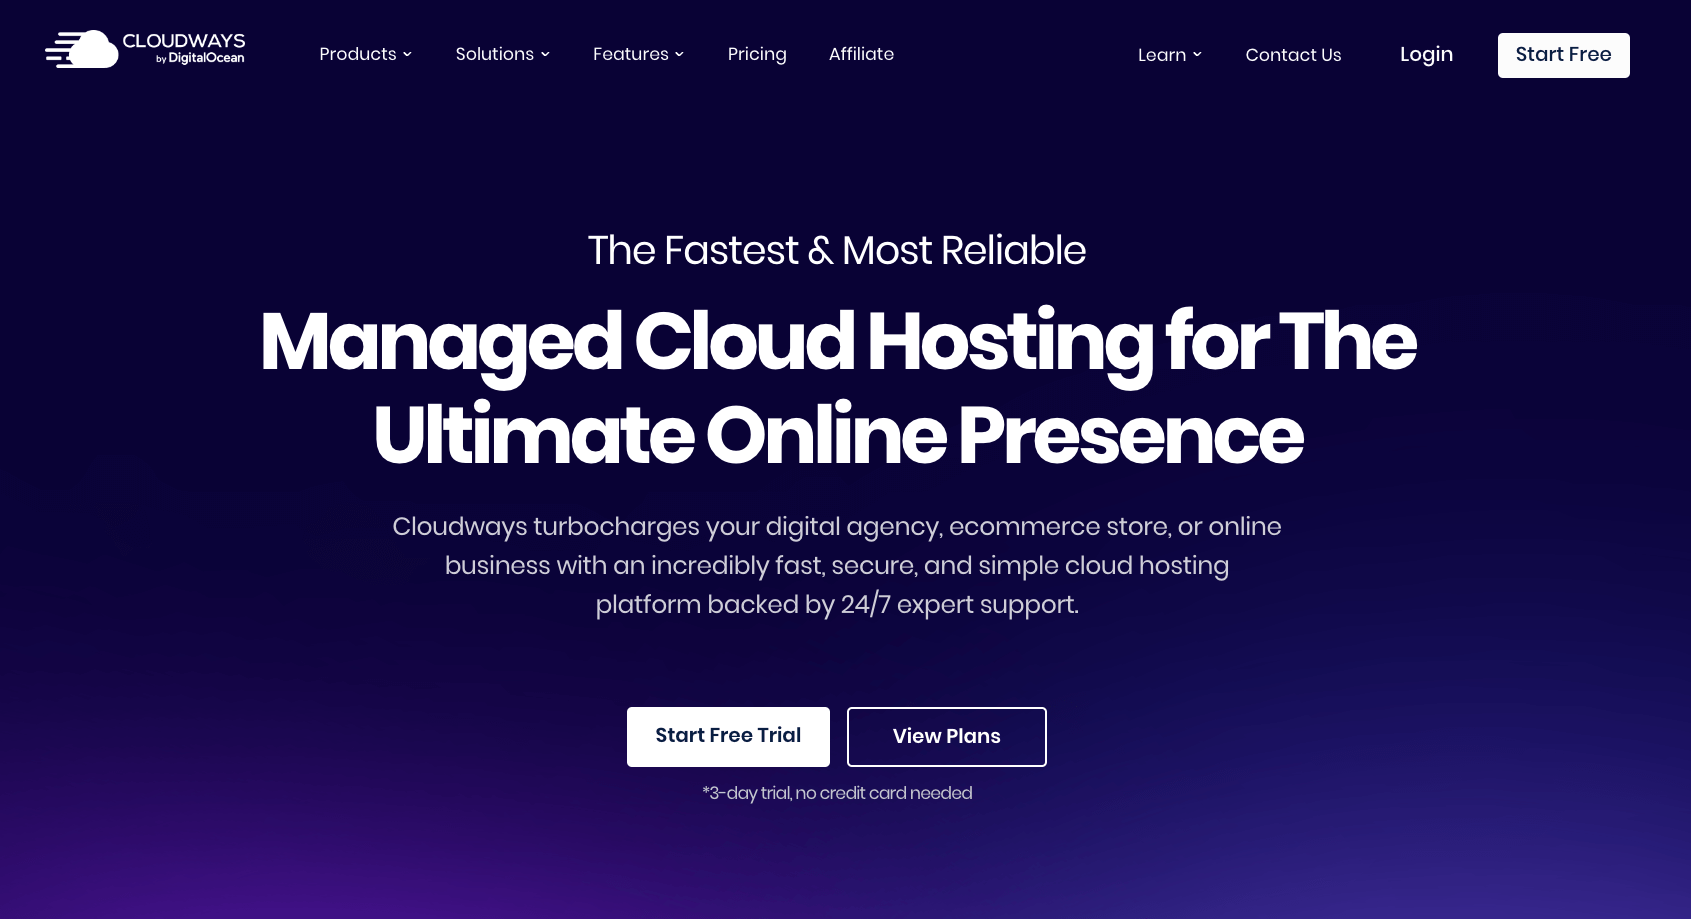 The Cloudways Homepage